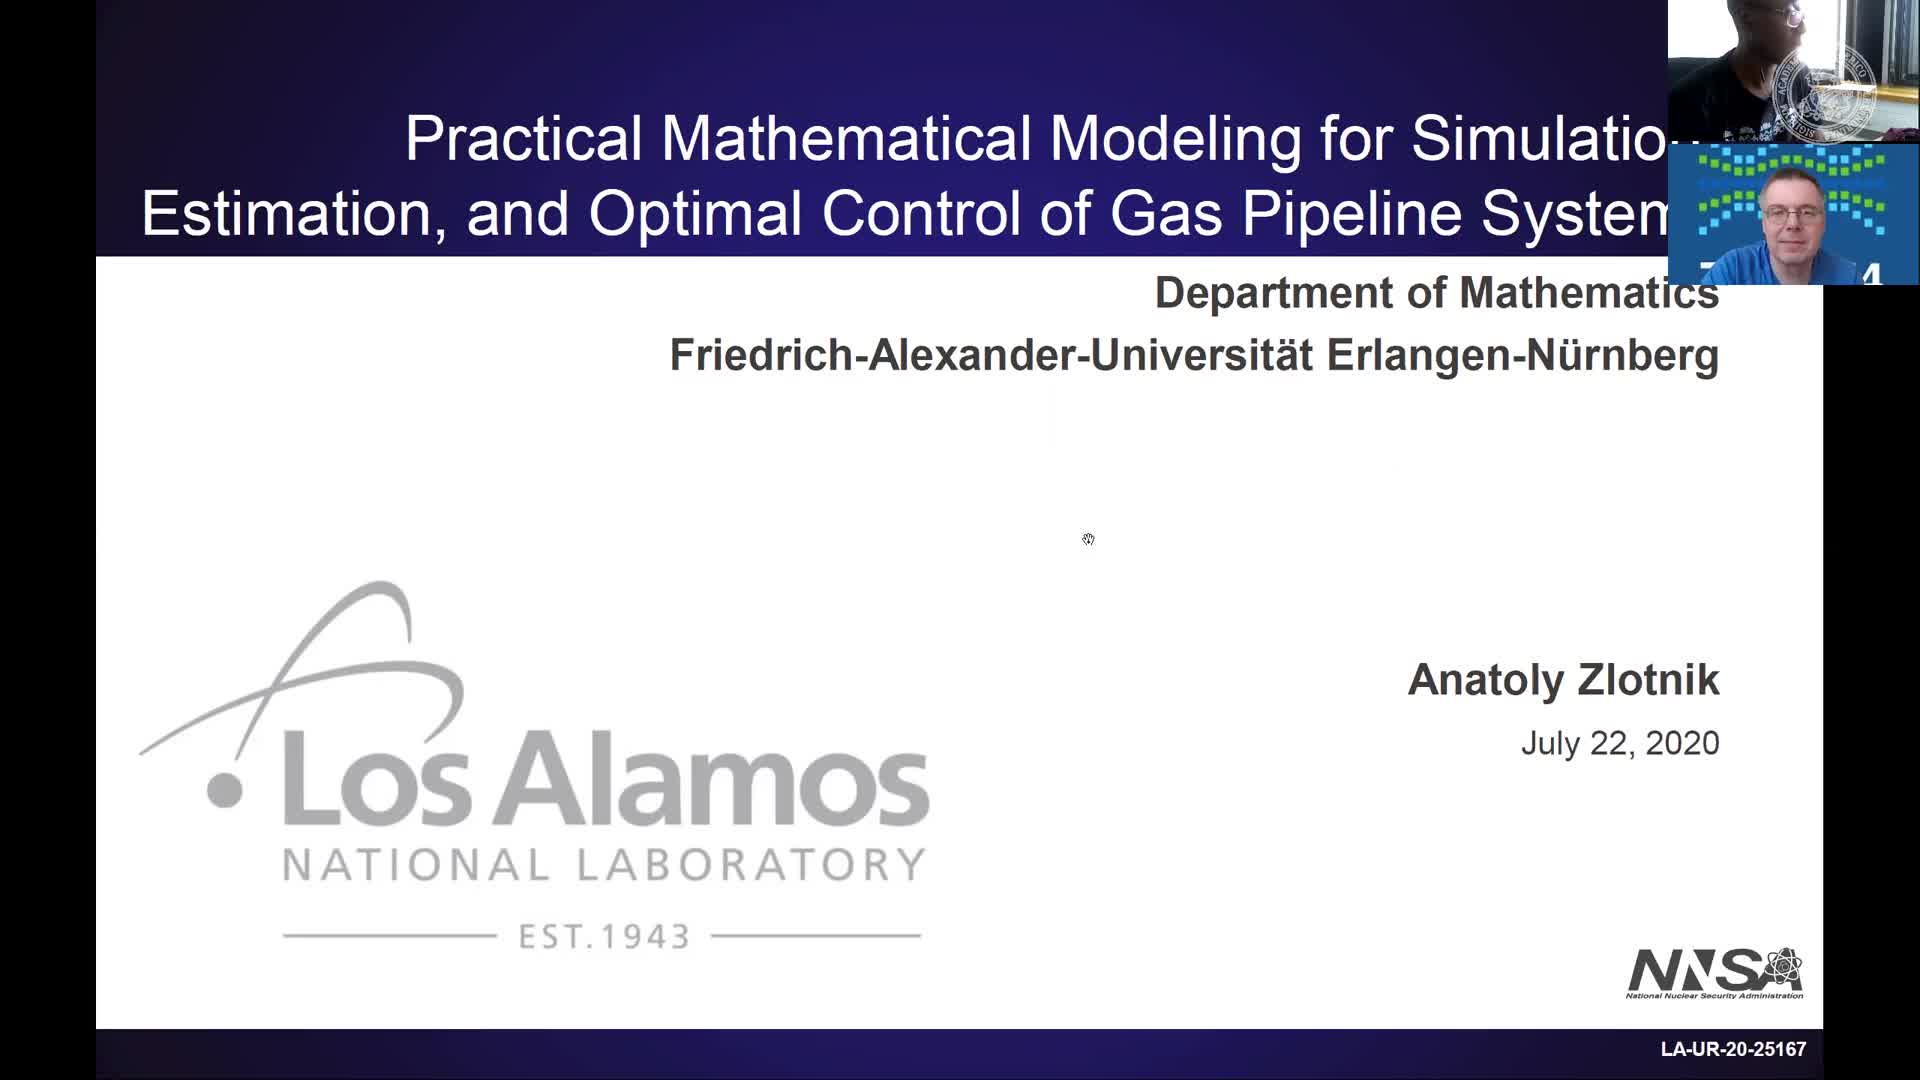 Practical Mathematical Modeling for Simulation, Estimation, and Optimal Control of Gas Pipeline Systems (Anatoly Zlotnik, Los Alamos National Laboratory) preview image